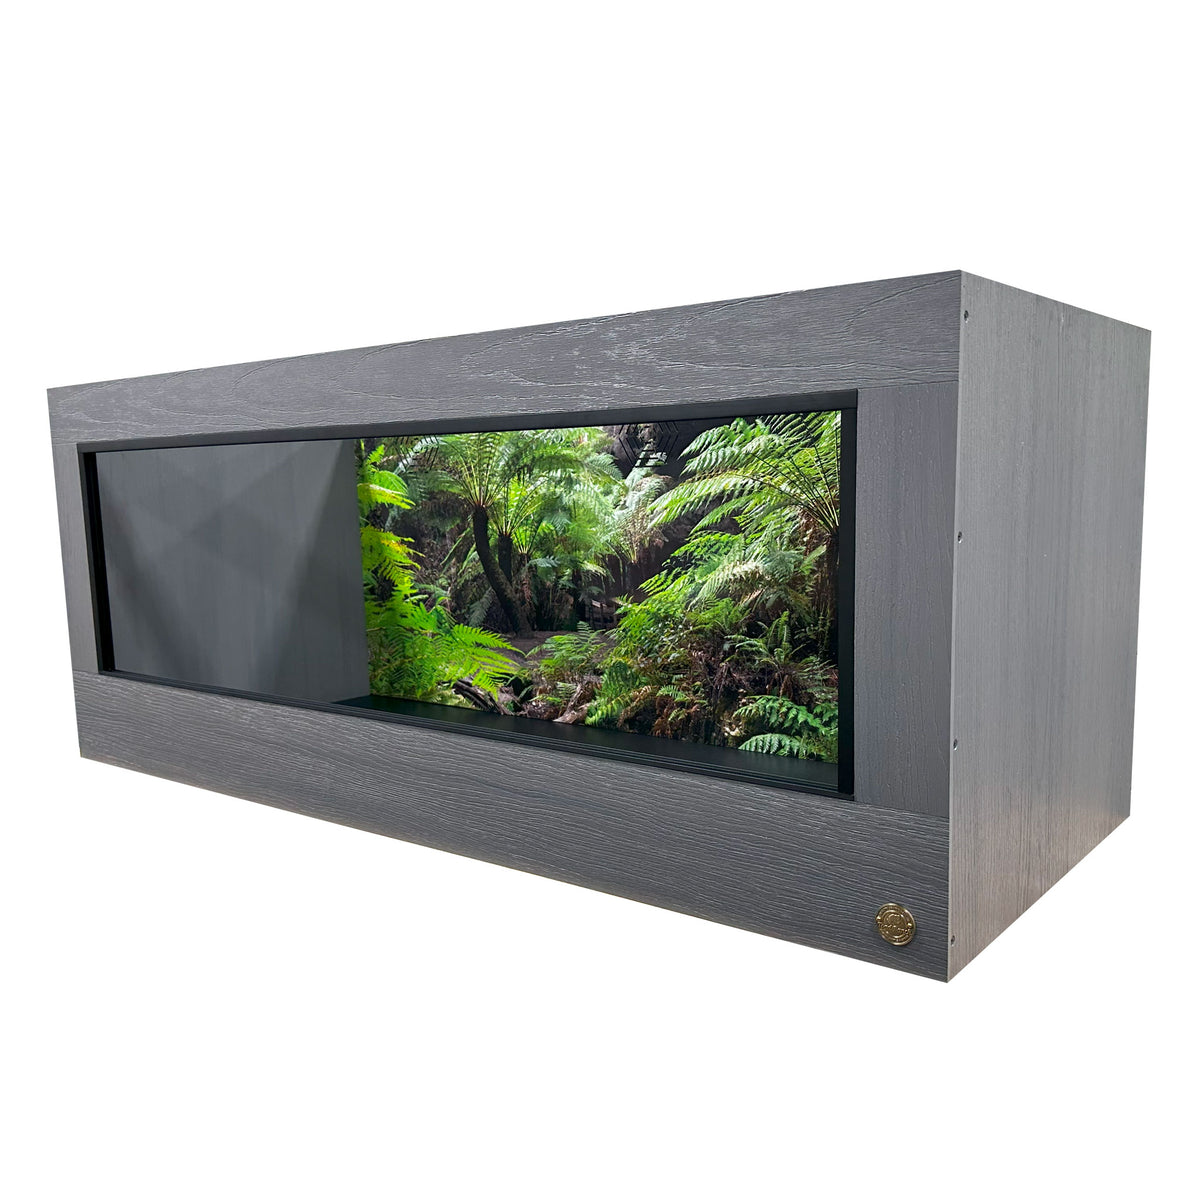 Top Quality 5x2x2 reptile enclosure. Featuring Driftwood HDPE design.